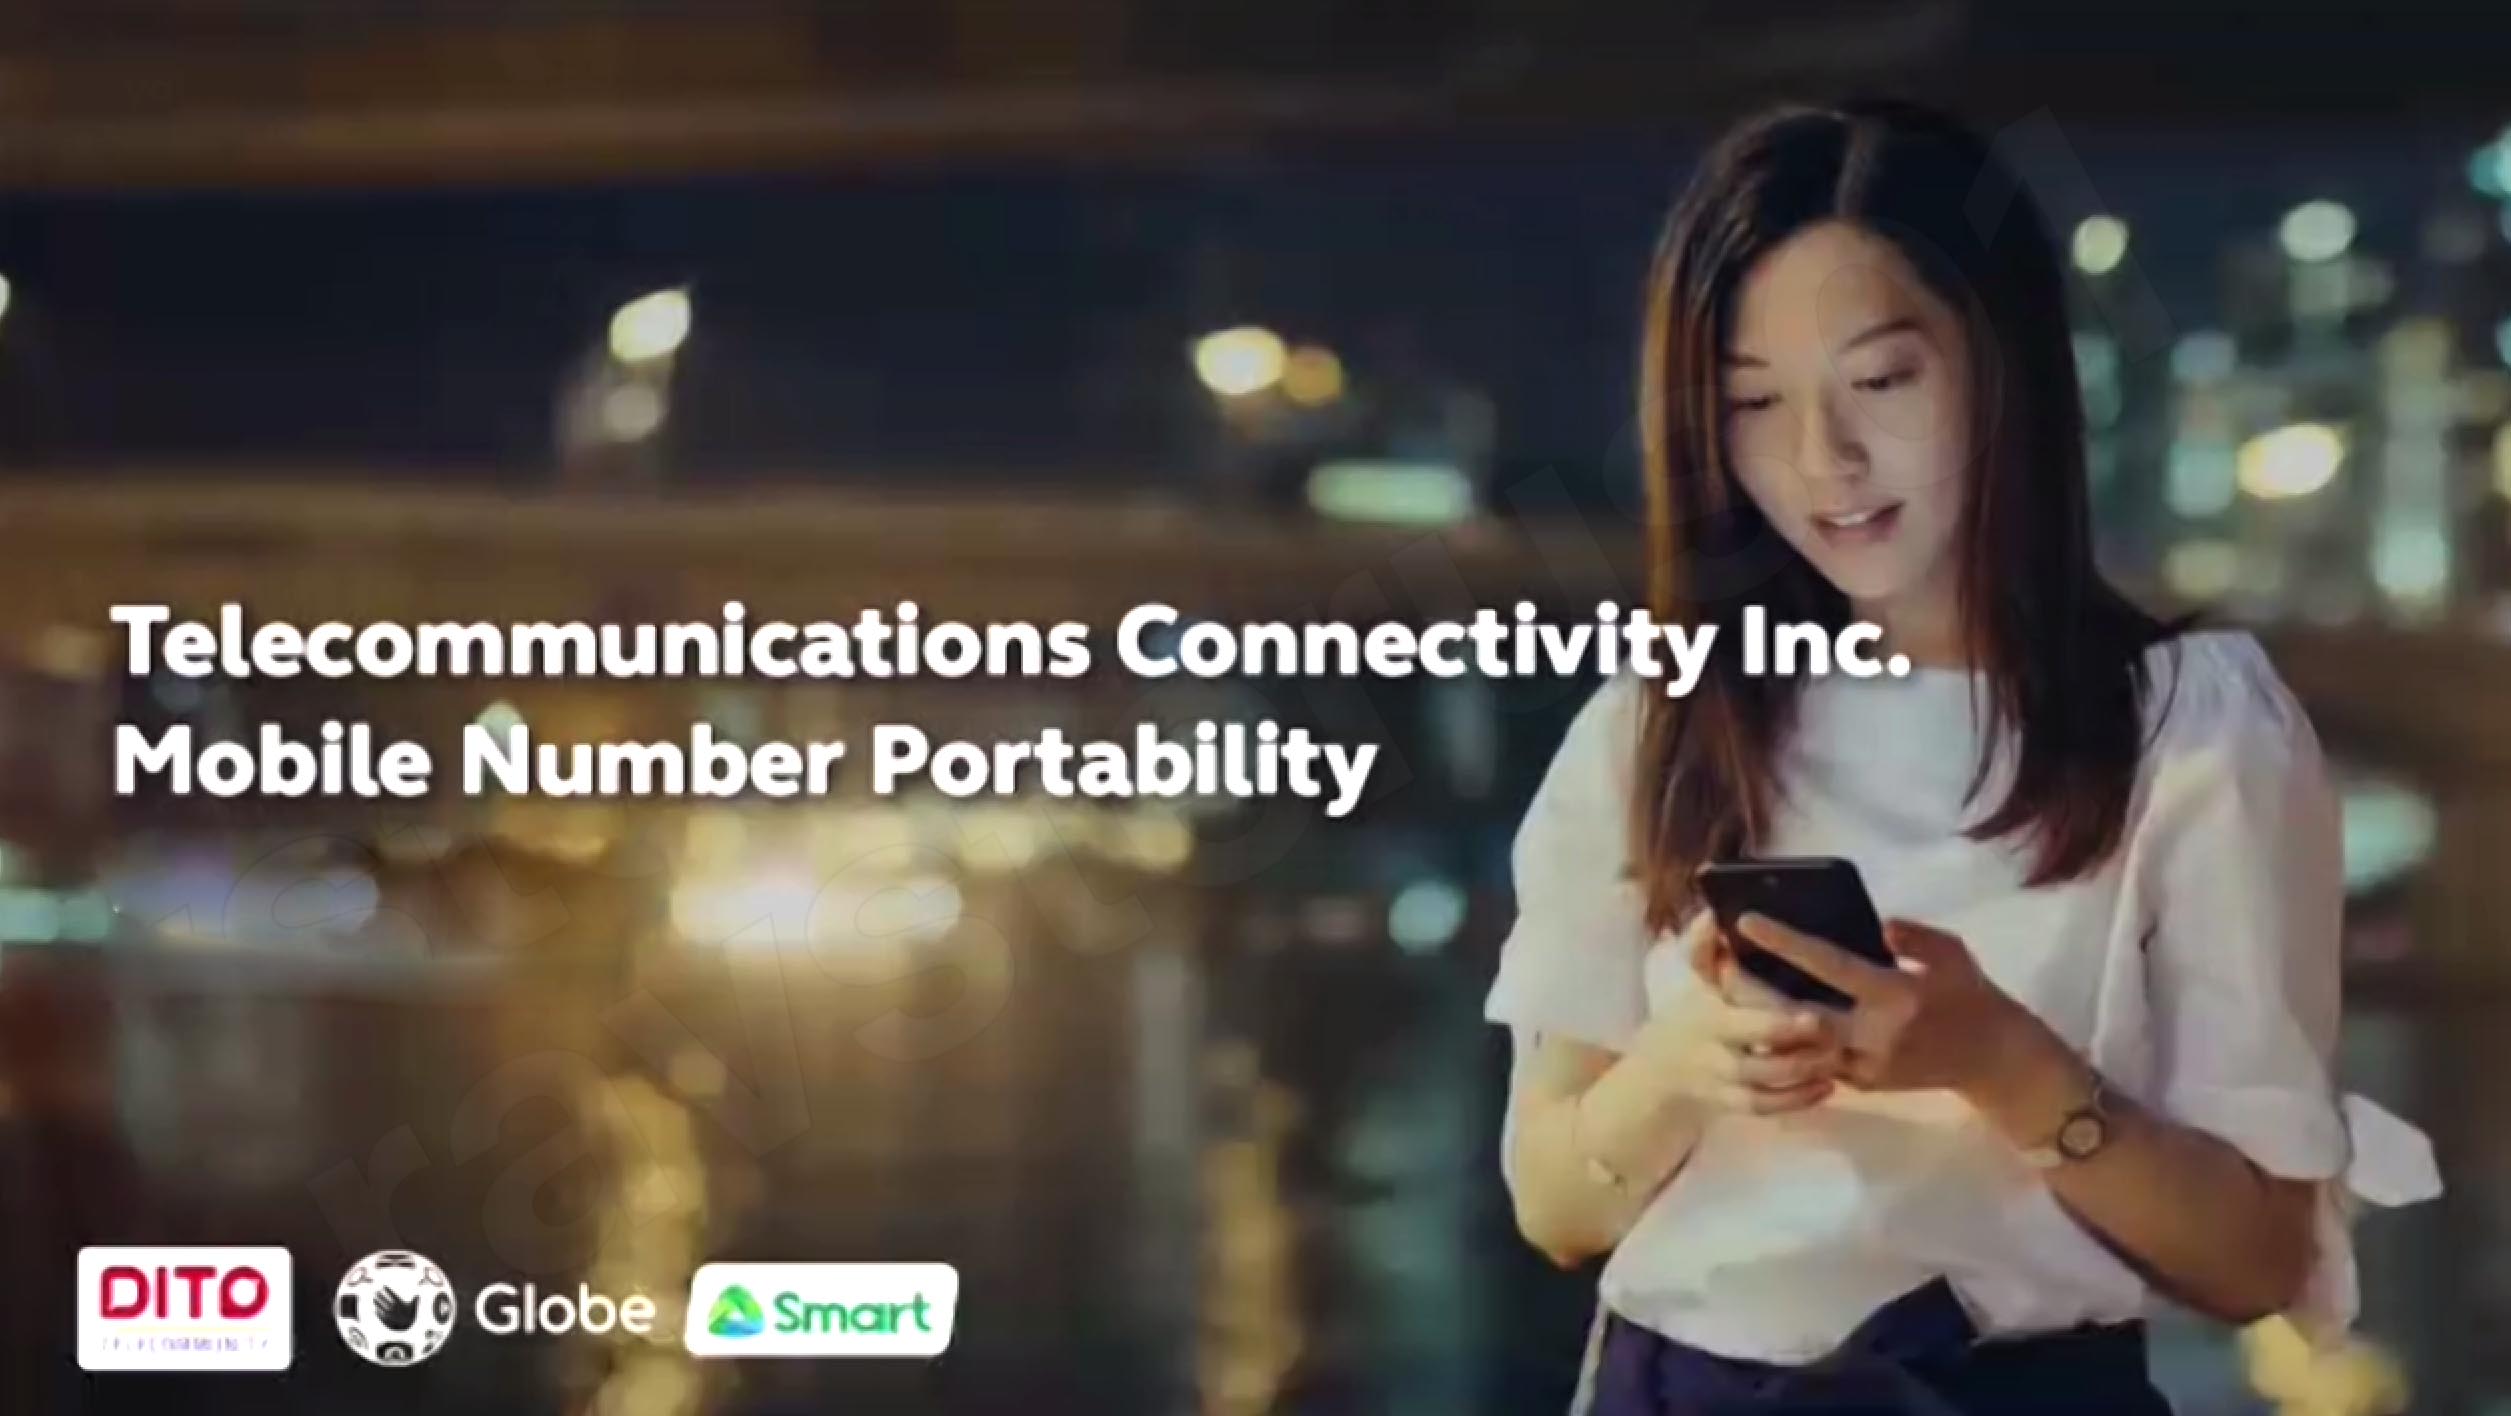 DITO, Globe and Smart subscribers thru TCI to enable number porting services on September 30, 2021